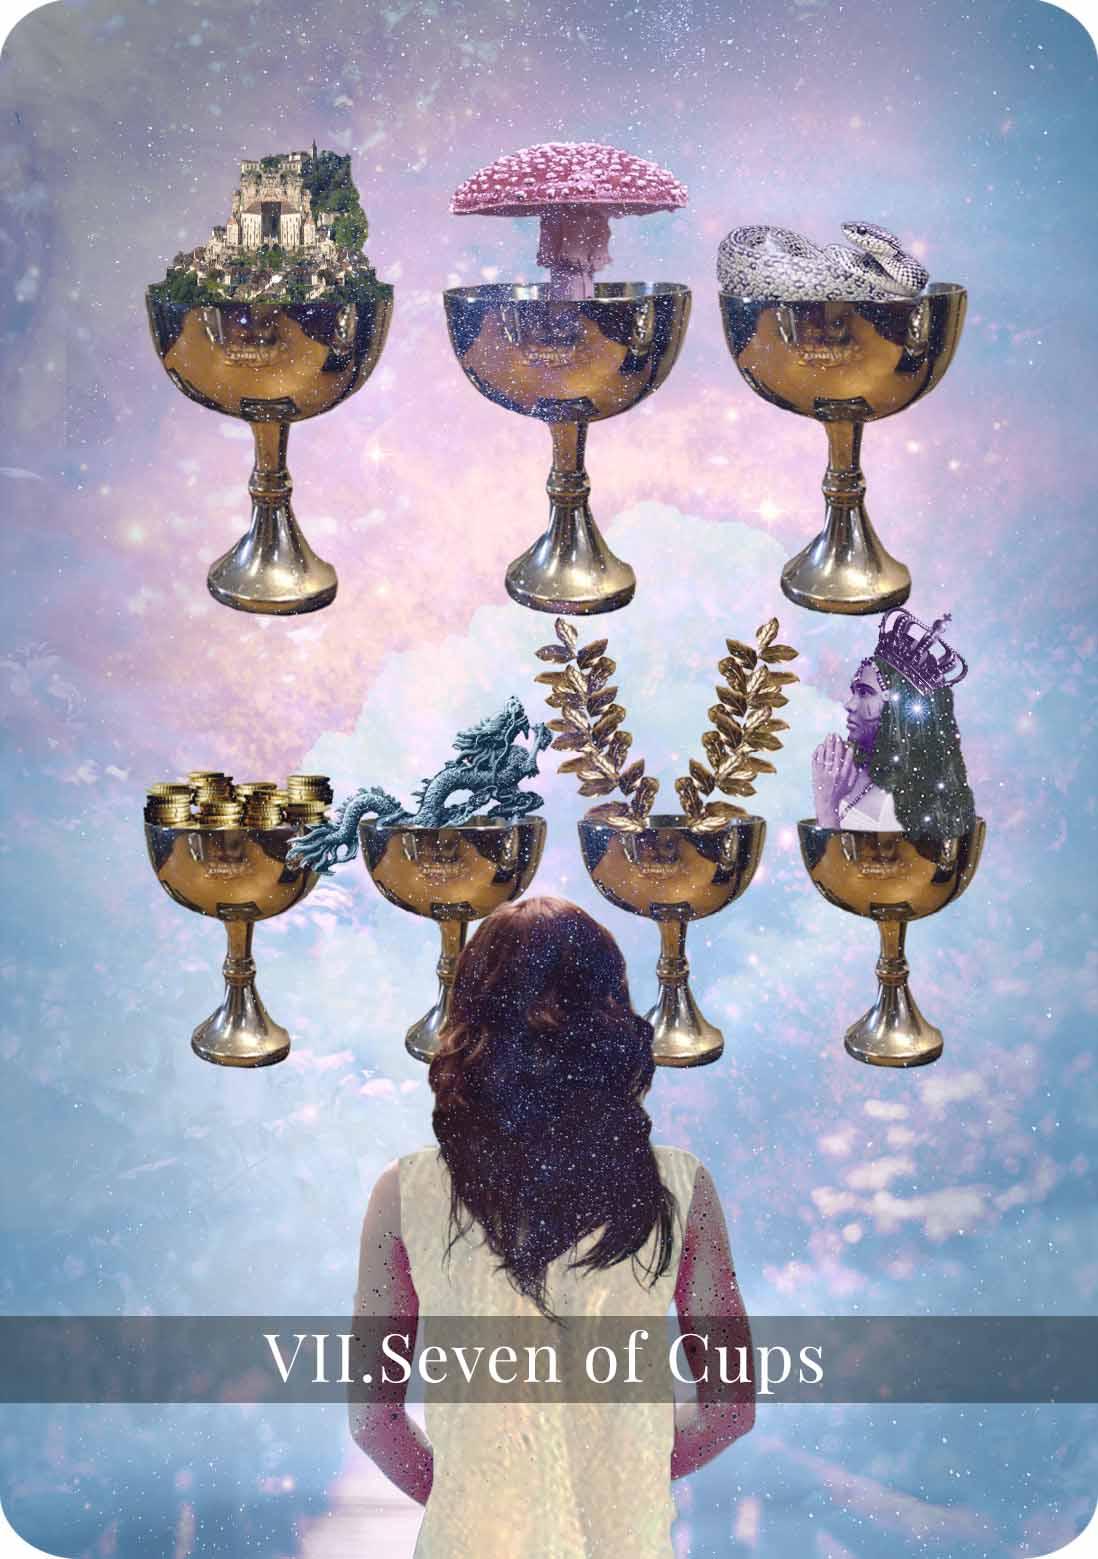 https://www.auntyflo.com/sites/default/files/styles/real_image/public/tarot-cards/7_Of_Cups_Tarot_Card_0.png